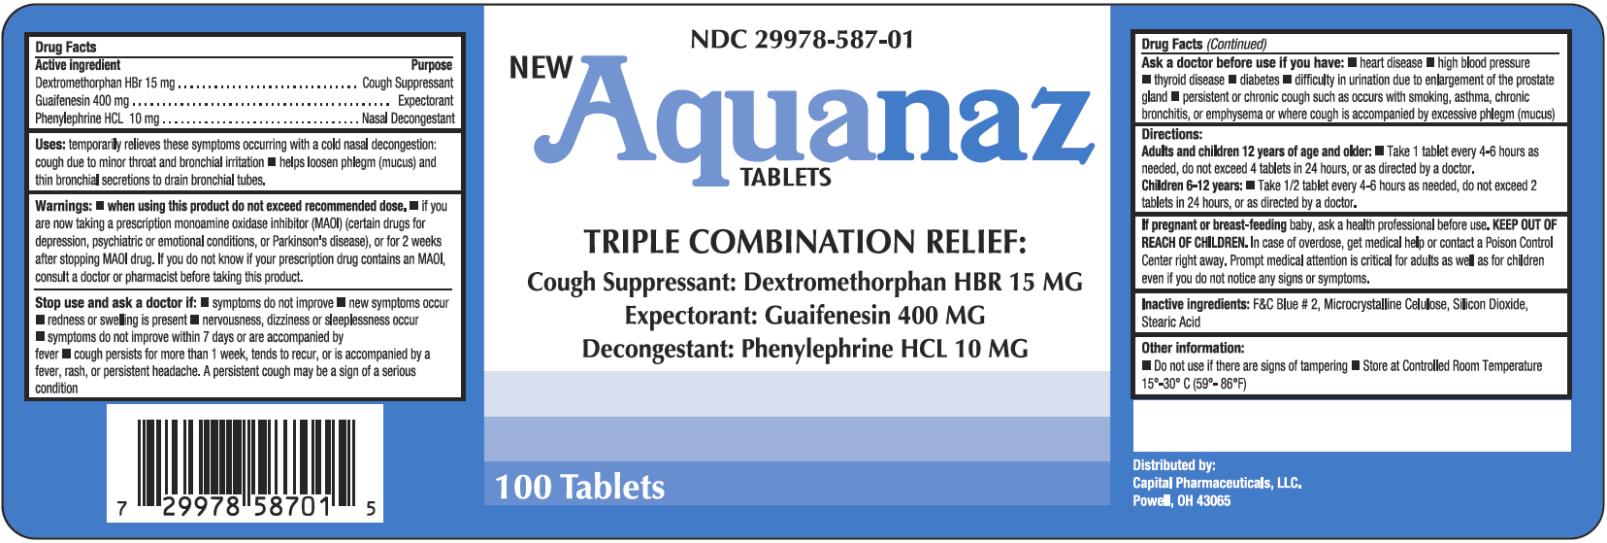 PRINCIPAL DISPLAY PANEL
NDC: <a href=/NDC/29978-587-01>29978-587-01</a>
NEW
Aquanaz
TABLETS
TRIPLE COMBINATION RELIEF:
Cough Suppressant: Dextromethorphan HBR 15 MG
Expectorant: Guaifenesin 400 MG
Decongestant: Phenylephrine HCL 10